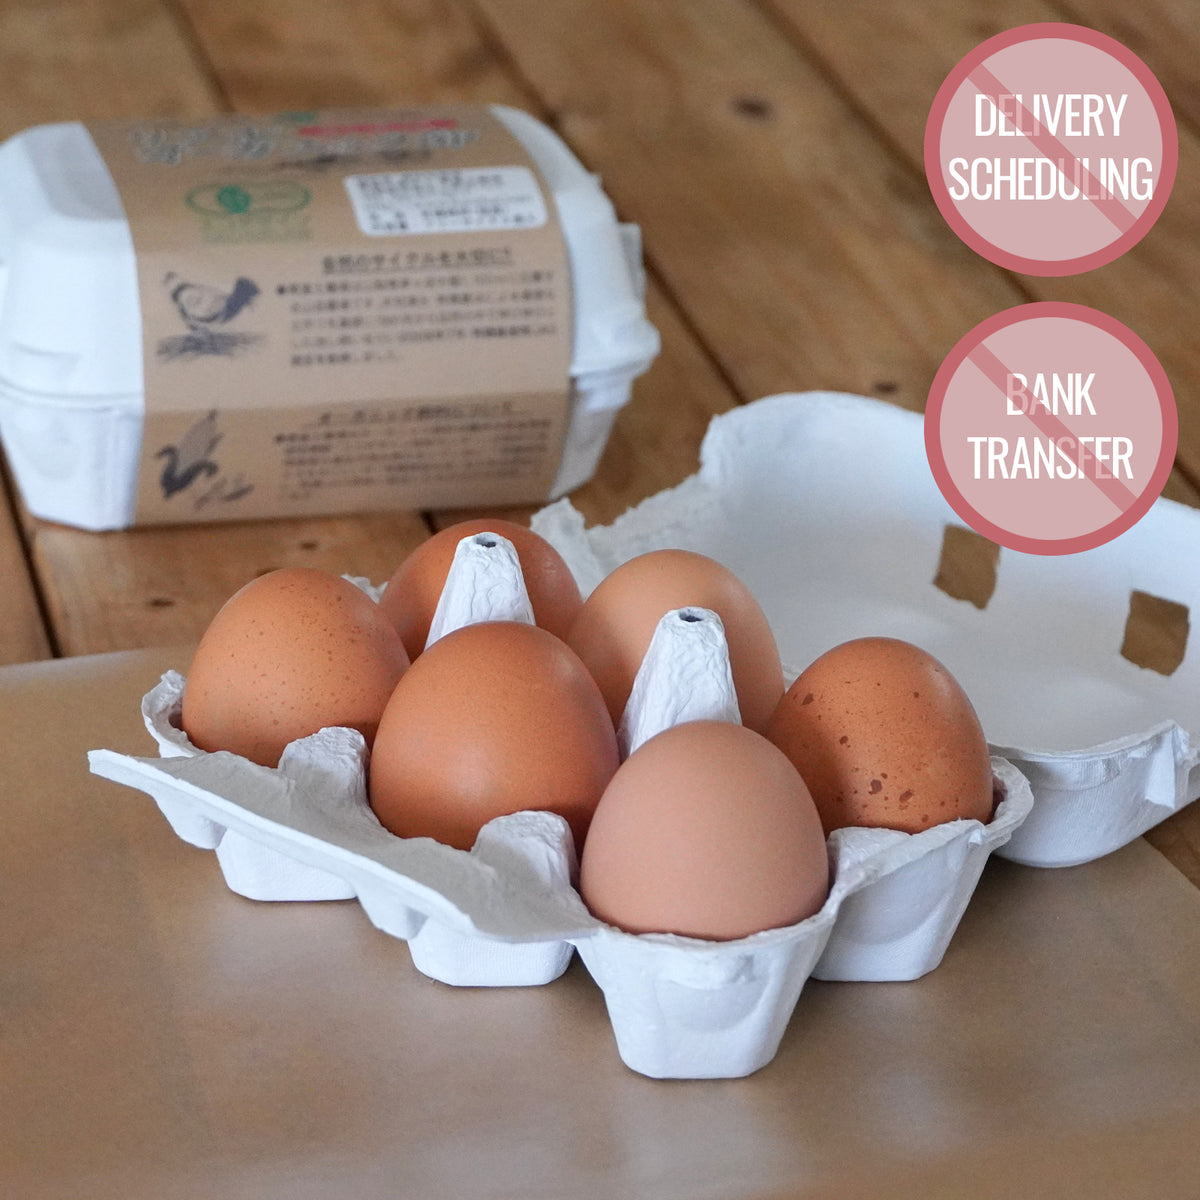 Certified Organic Free-Range Eggs from Japan (12 Eggs) (Terms & Conditions Apply) - Horizon Farms